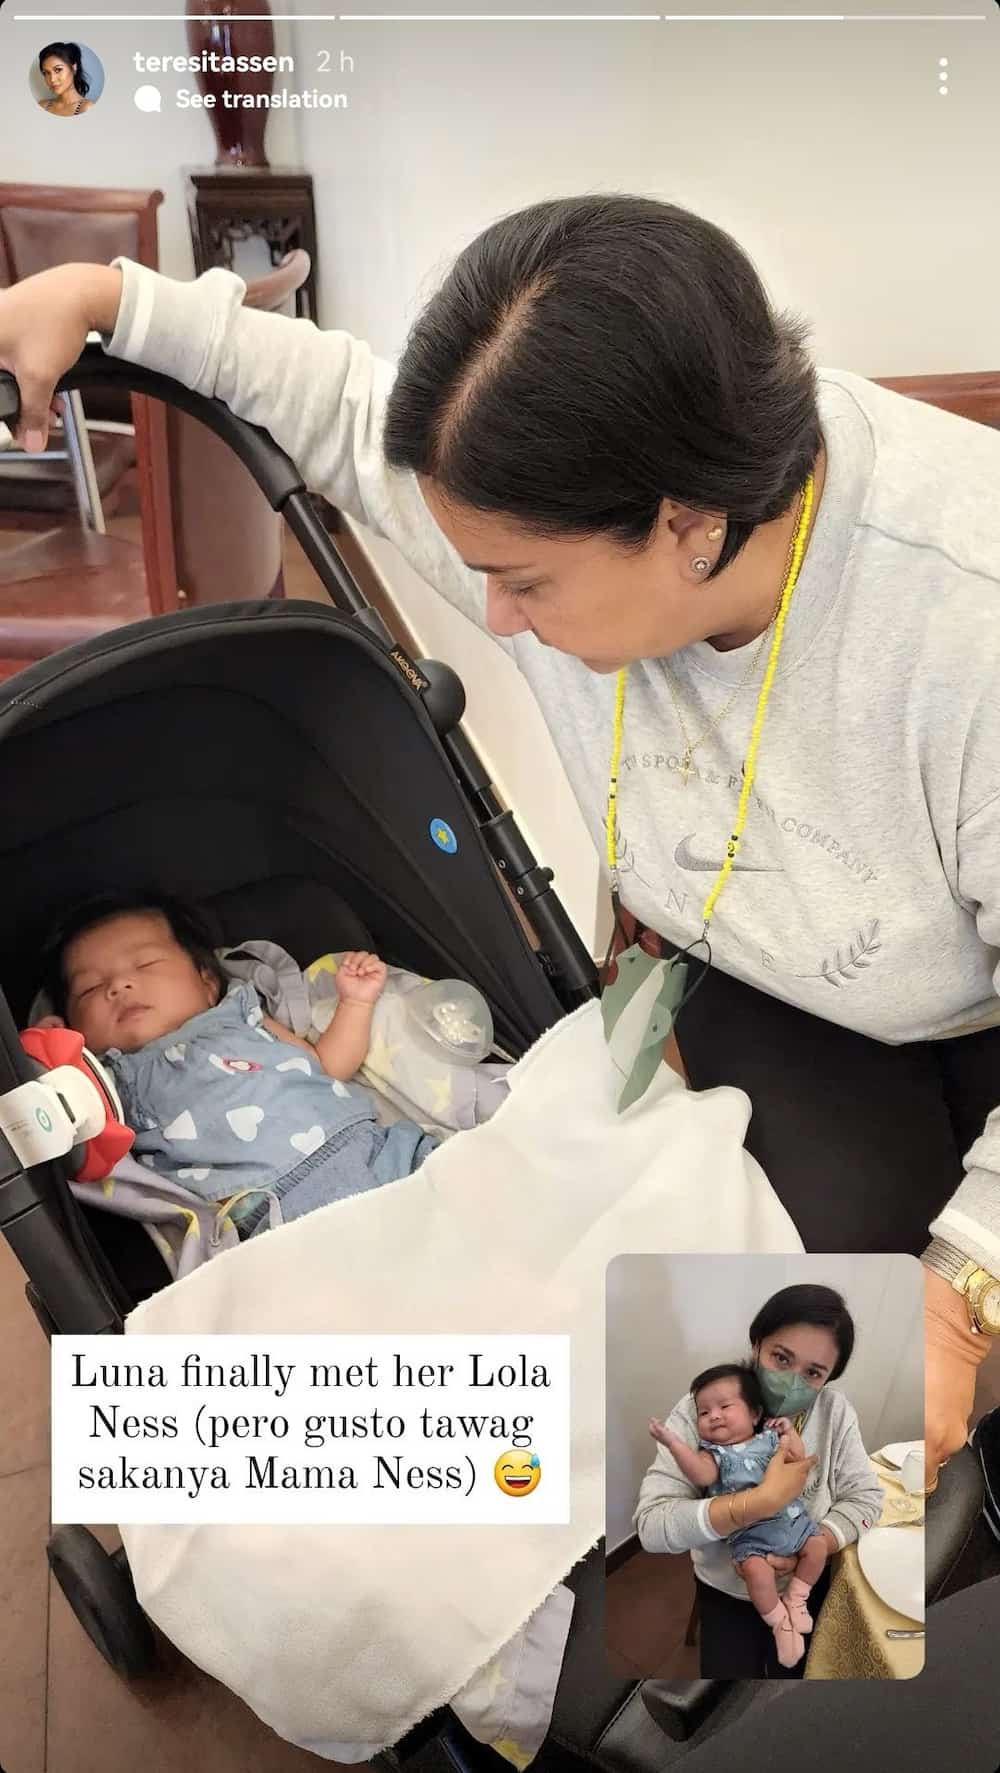 Winwyn Marquez’s baby Luna meets her lola Alma Moreno for the 1st time